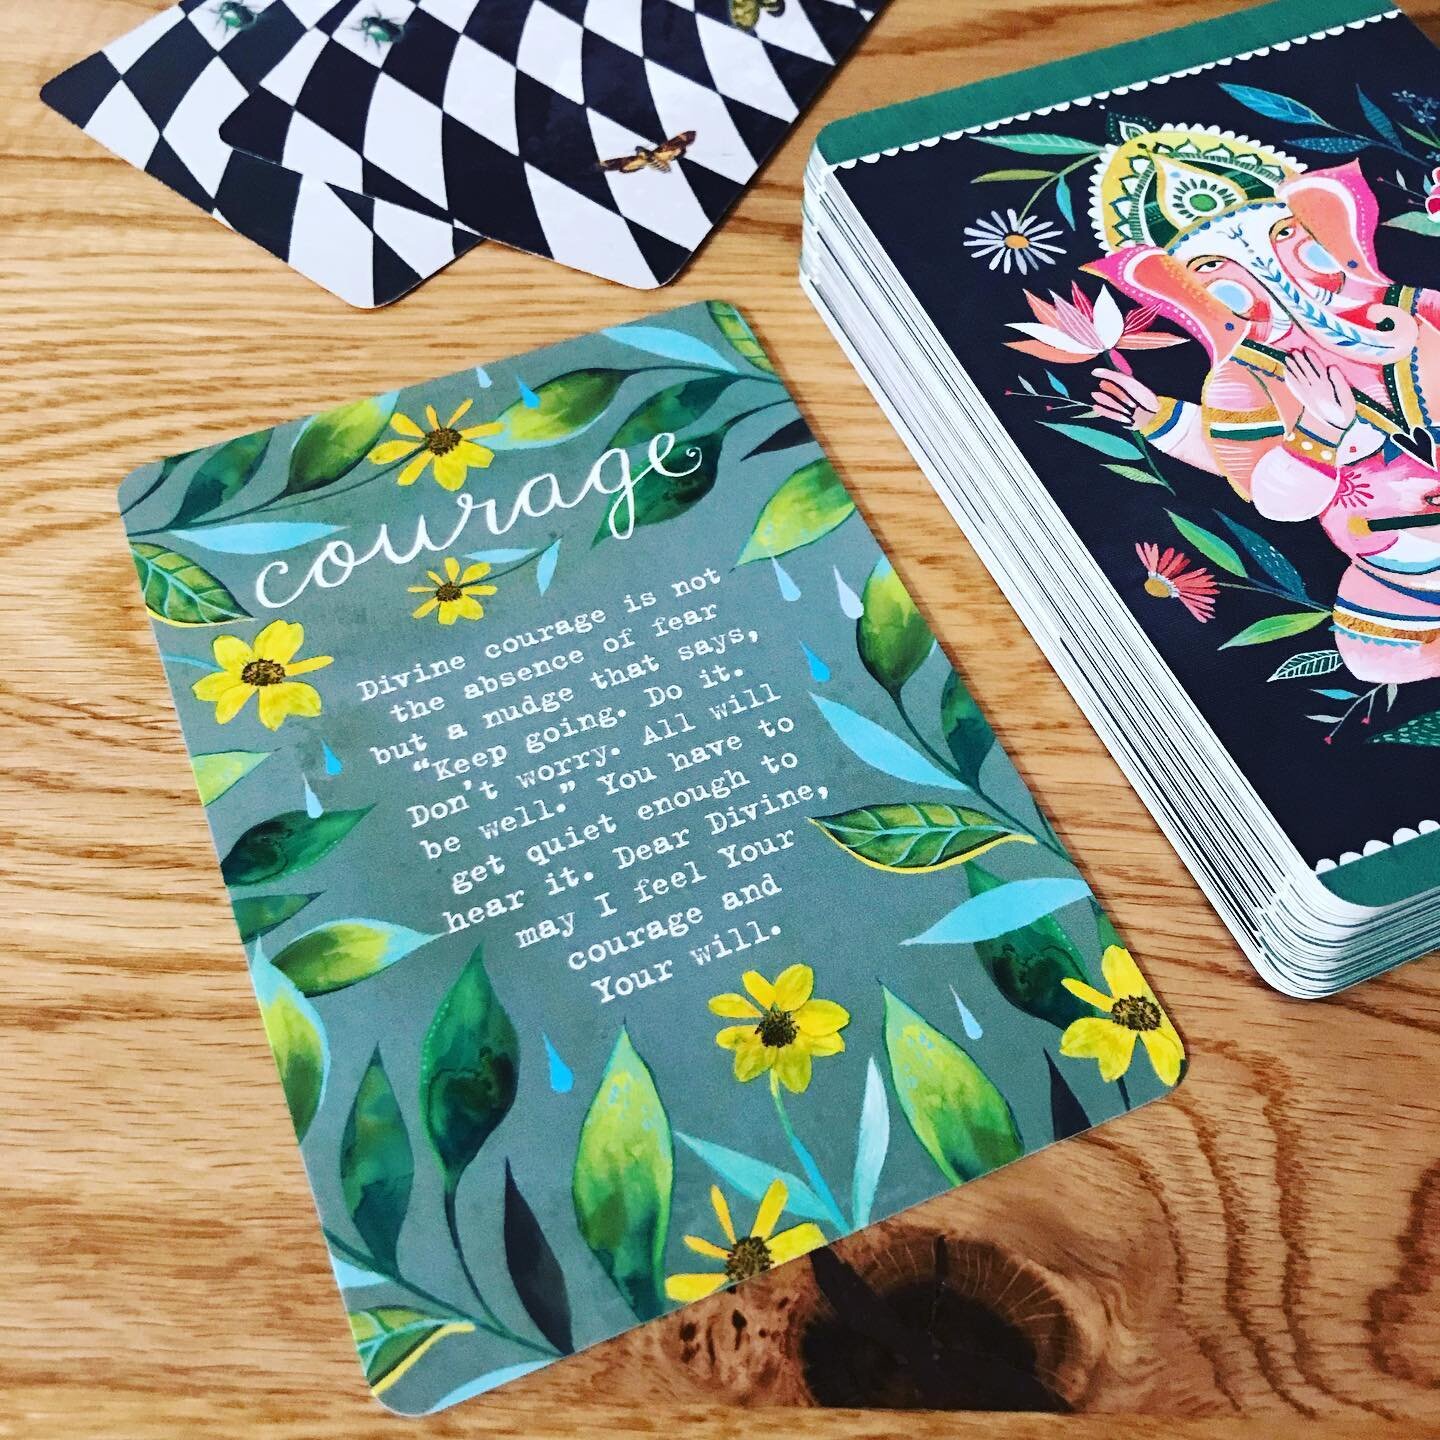 For anyone who needs it tonight 🌻 You are stronger than you realize! ❤️ #theintuitiveteacup #wildofferingoracle #dailyoracle #oraclecards #oraclereading #thursdayvibes #jupiterday #tarotlover #tarotreader #tarotreadersofinstagram #tarotreadersofig #